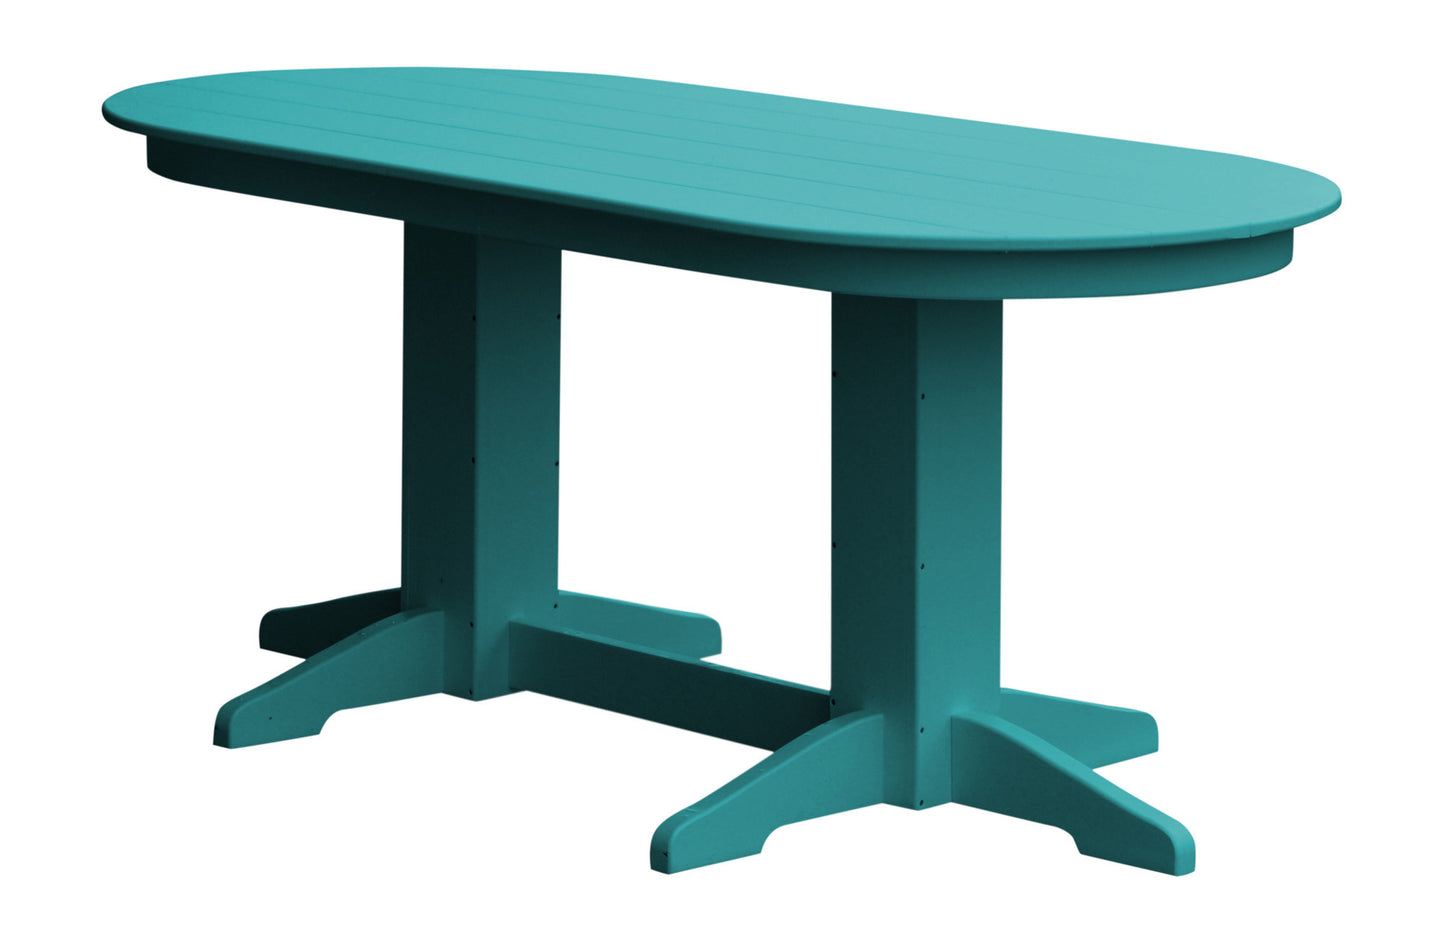 A&L Furniture Company Recycled Plastic 6' Oval Dining Table - Aruba Blue